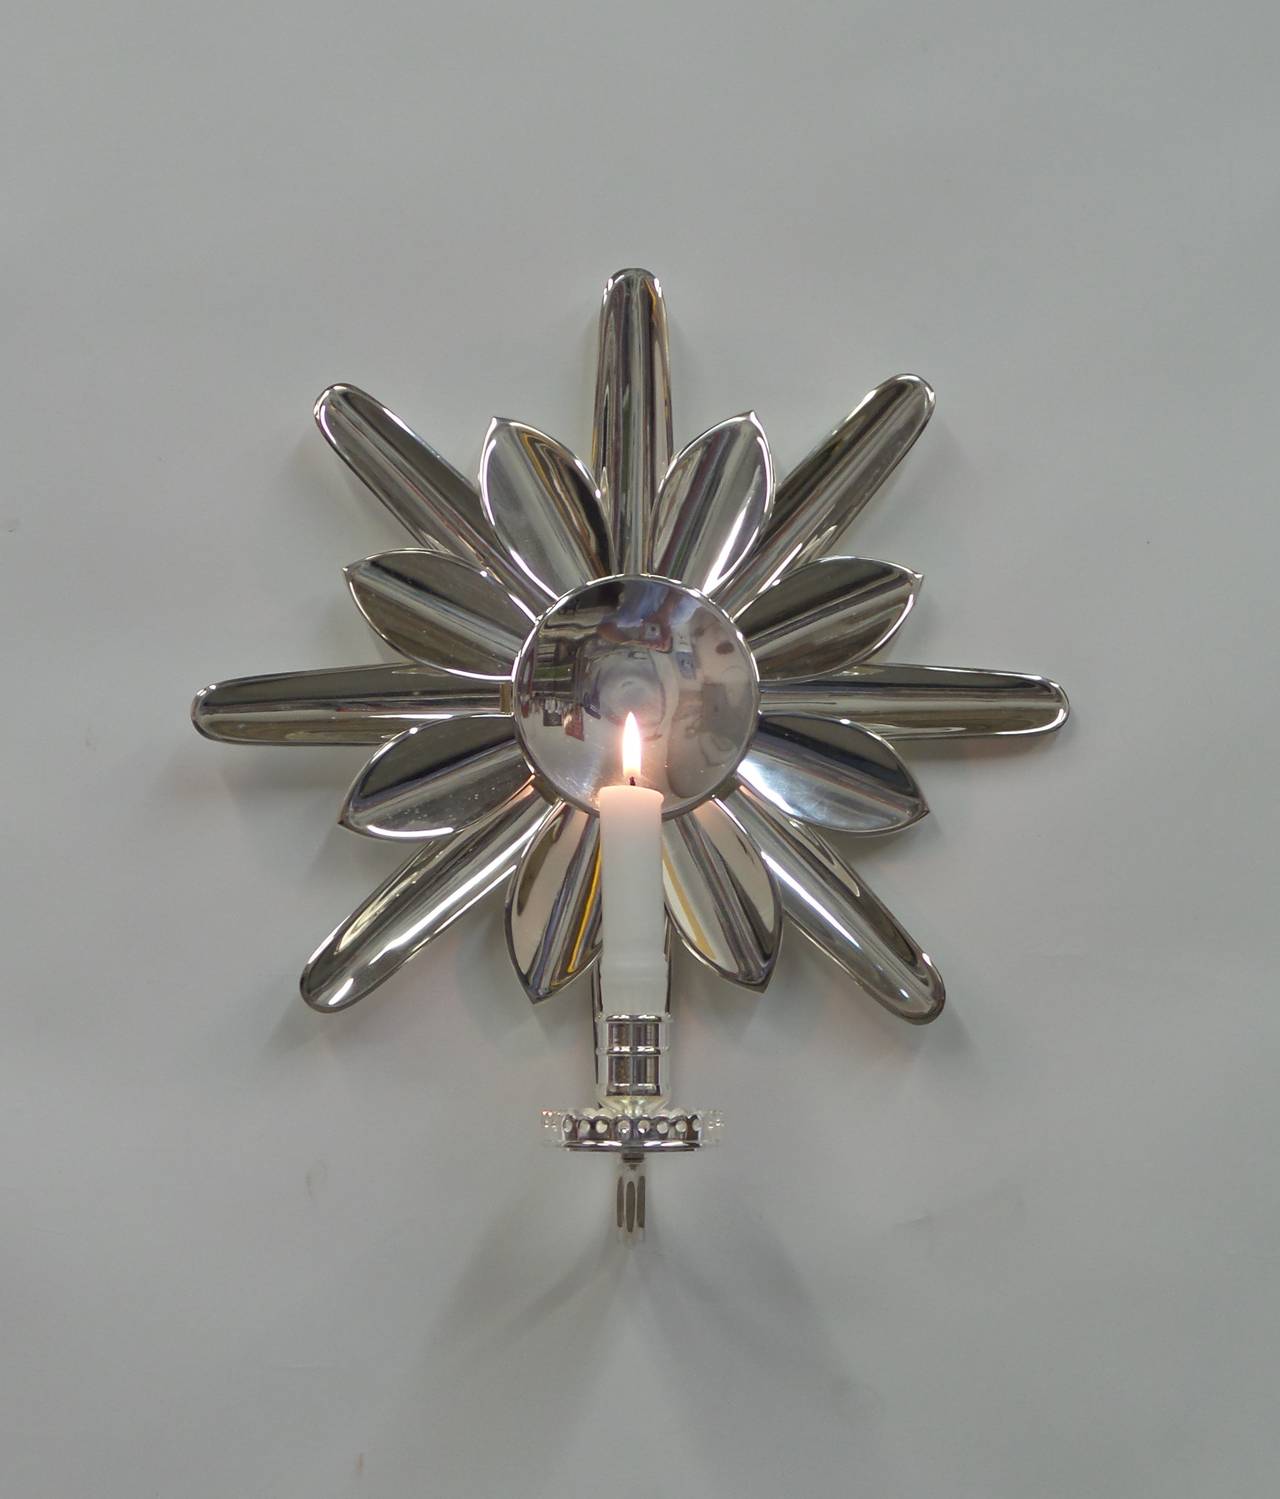 A sunburst form wall sconce, in silvered brass, with a single candleholder arm. Wiring with a wax faux-candle stick and candle form bulb available.